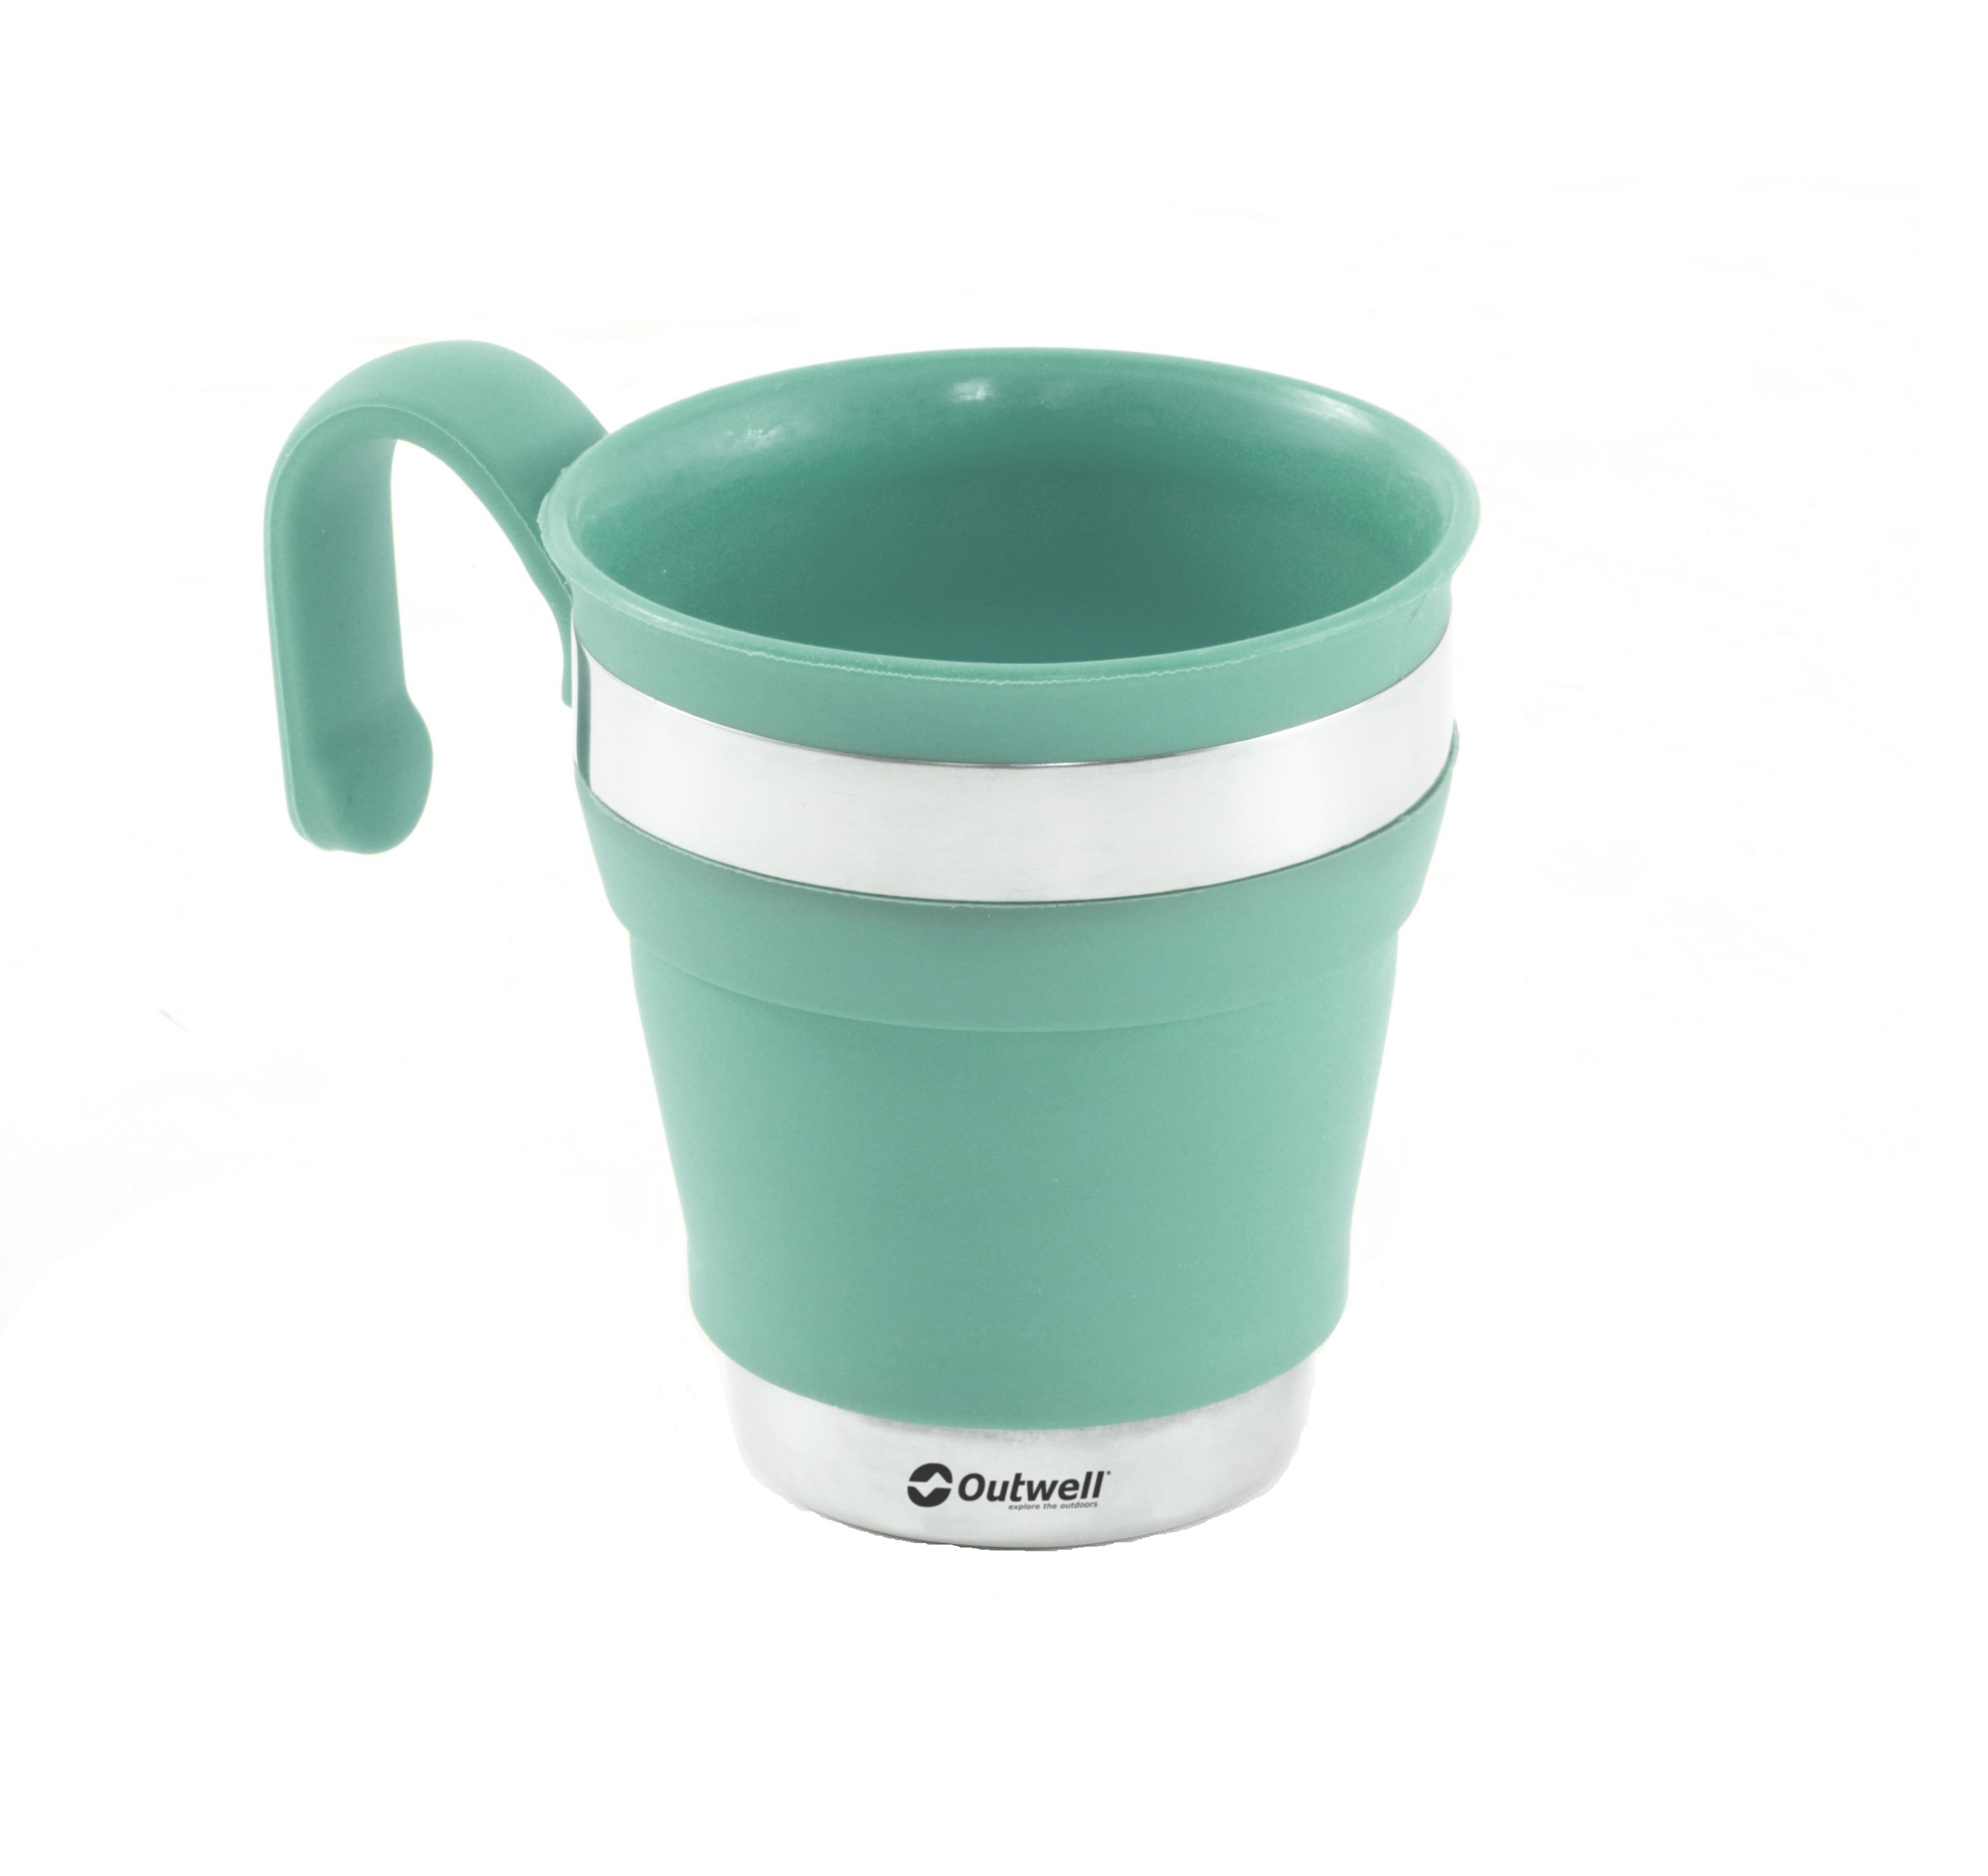 An image of Outwell Collaps Mug Turquoise Blue